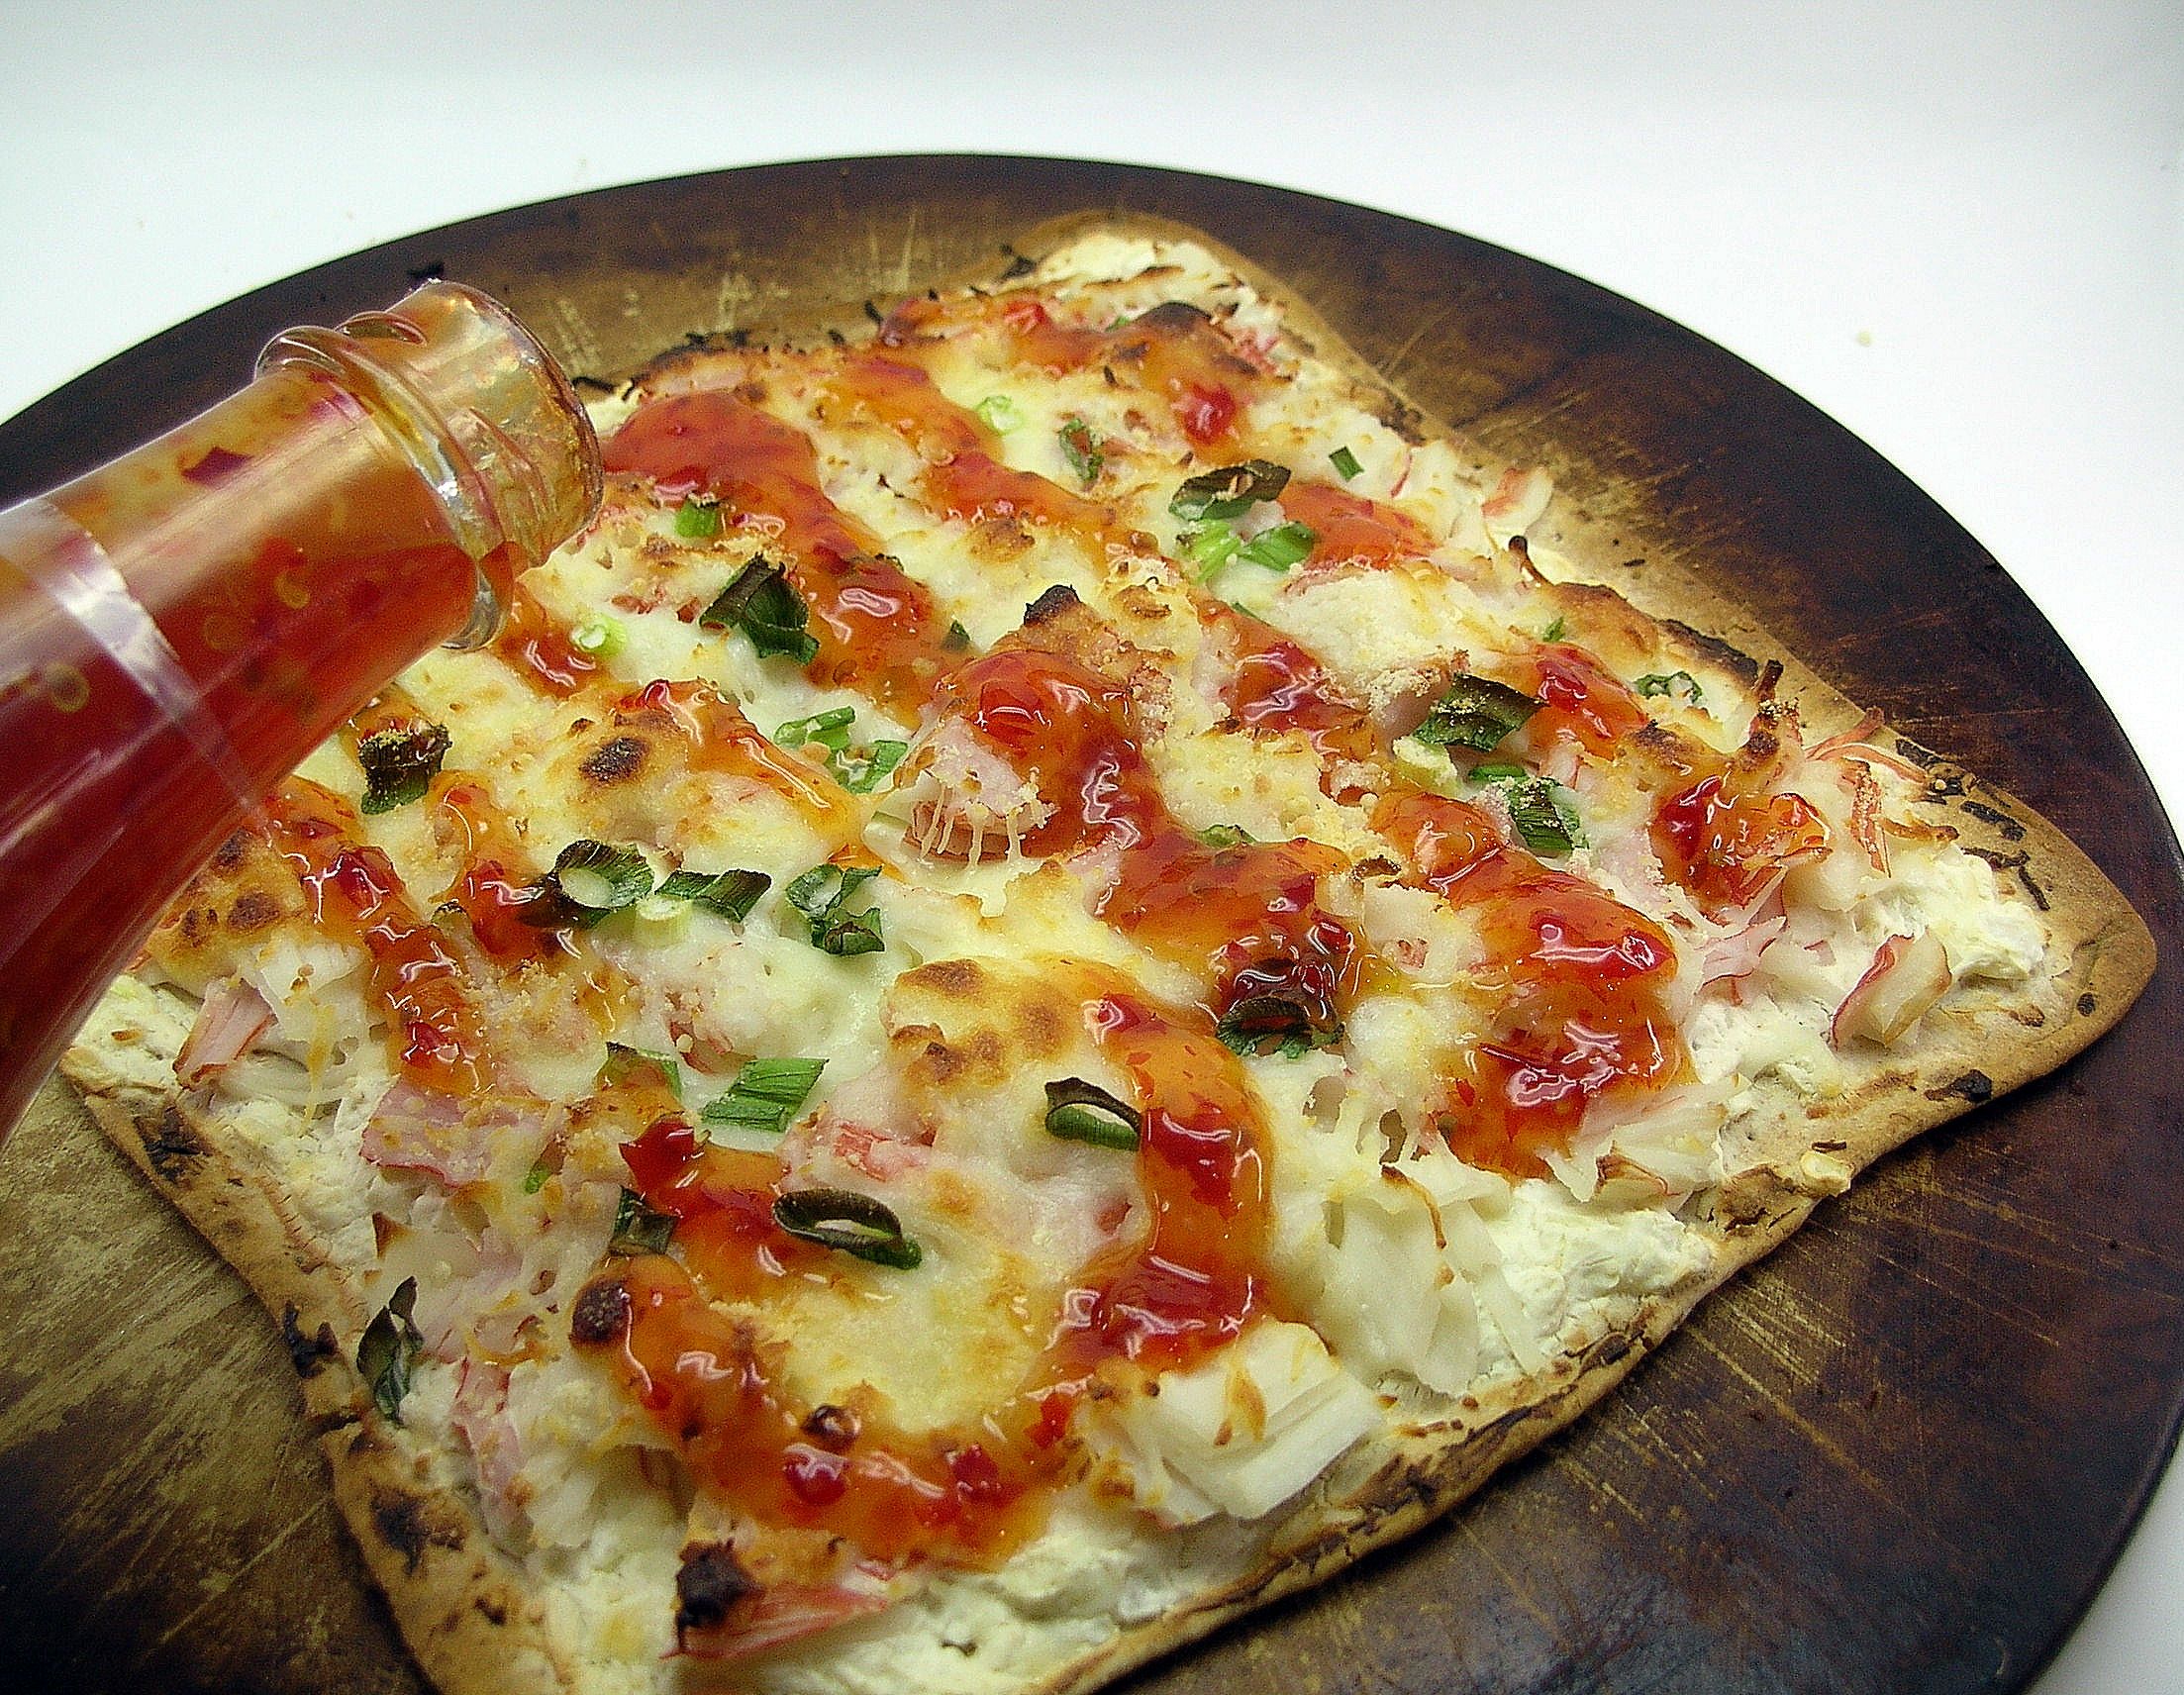 Asian style pizza